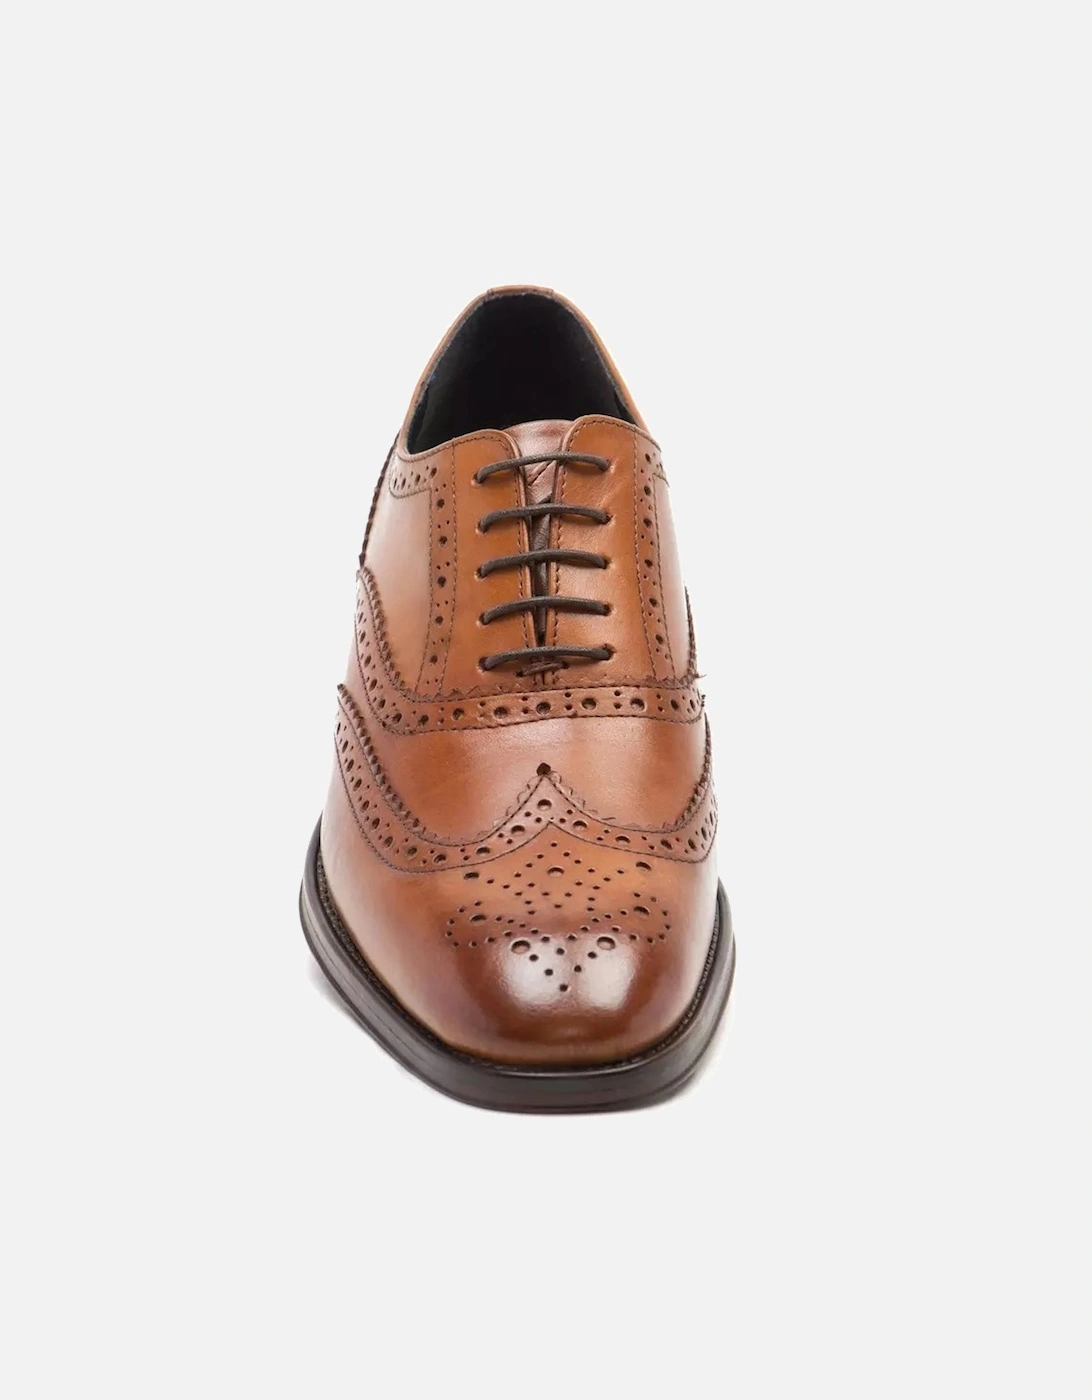 Mens Reynolds Leather Brogues